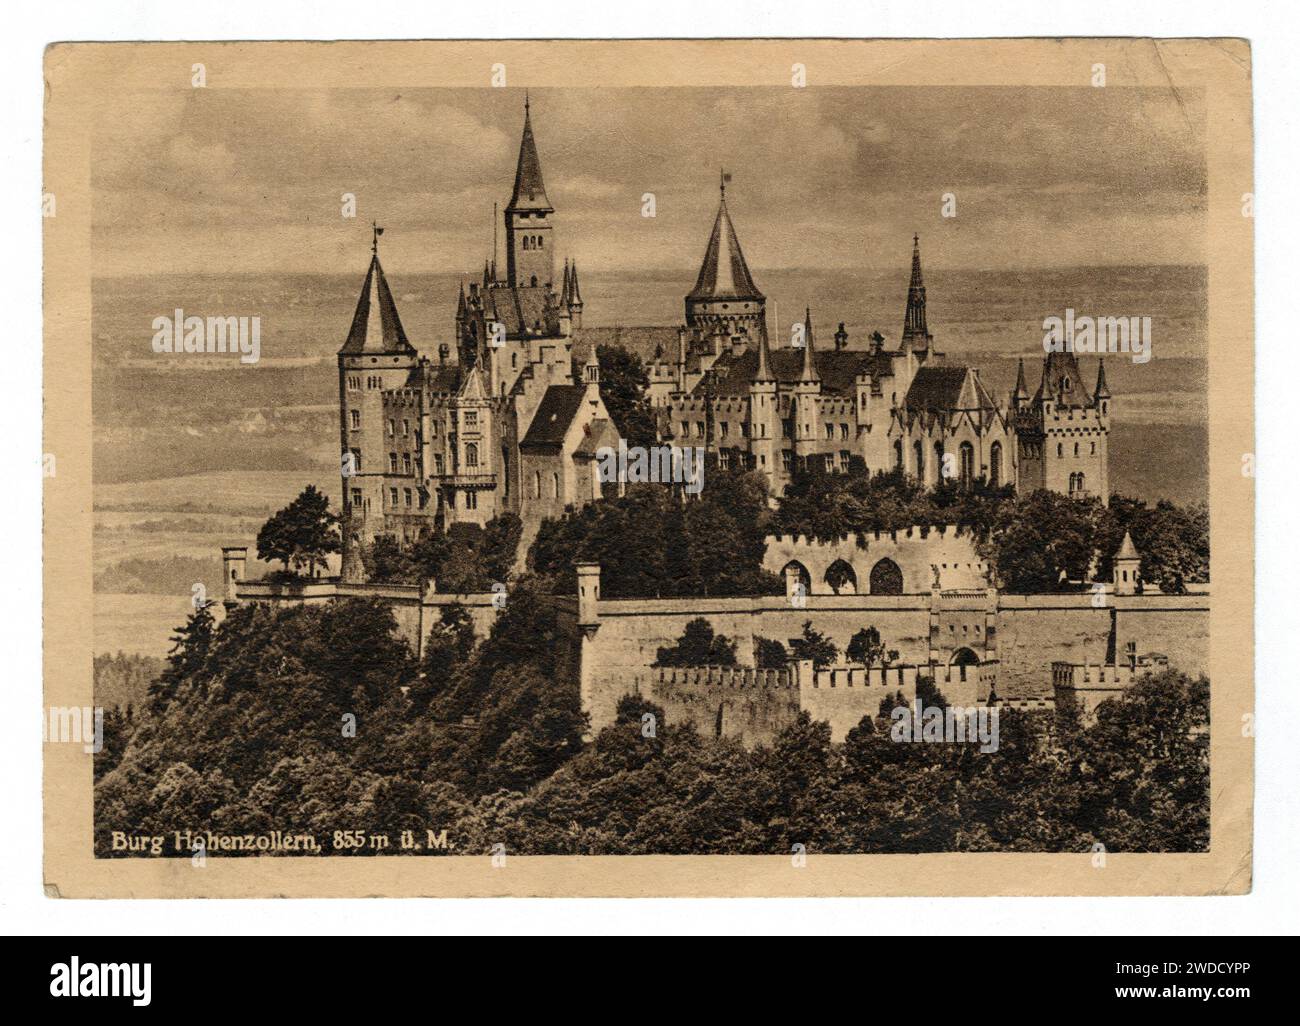 1940s sepia postcard view of Hohenzollern Castle near Hechingen, Germany. Stock Photo